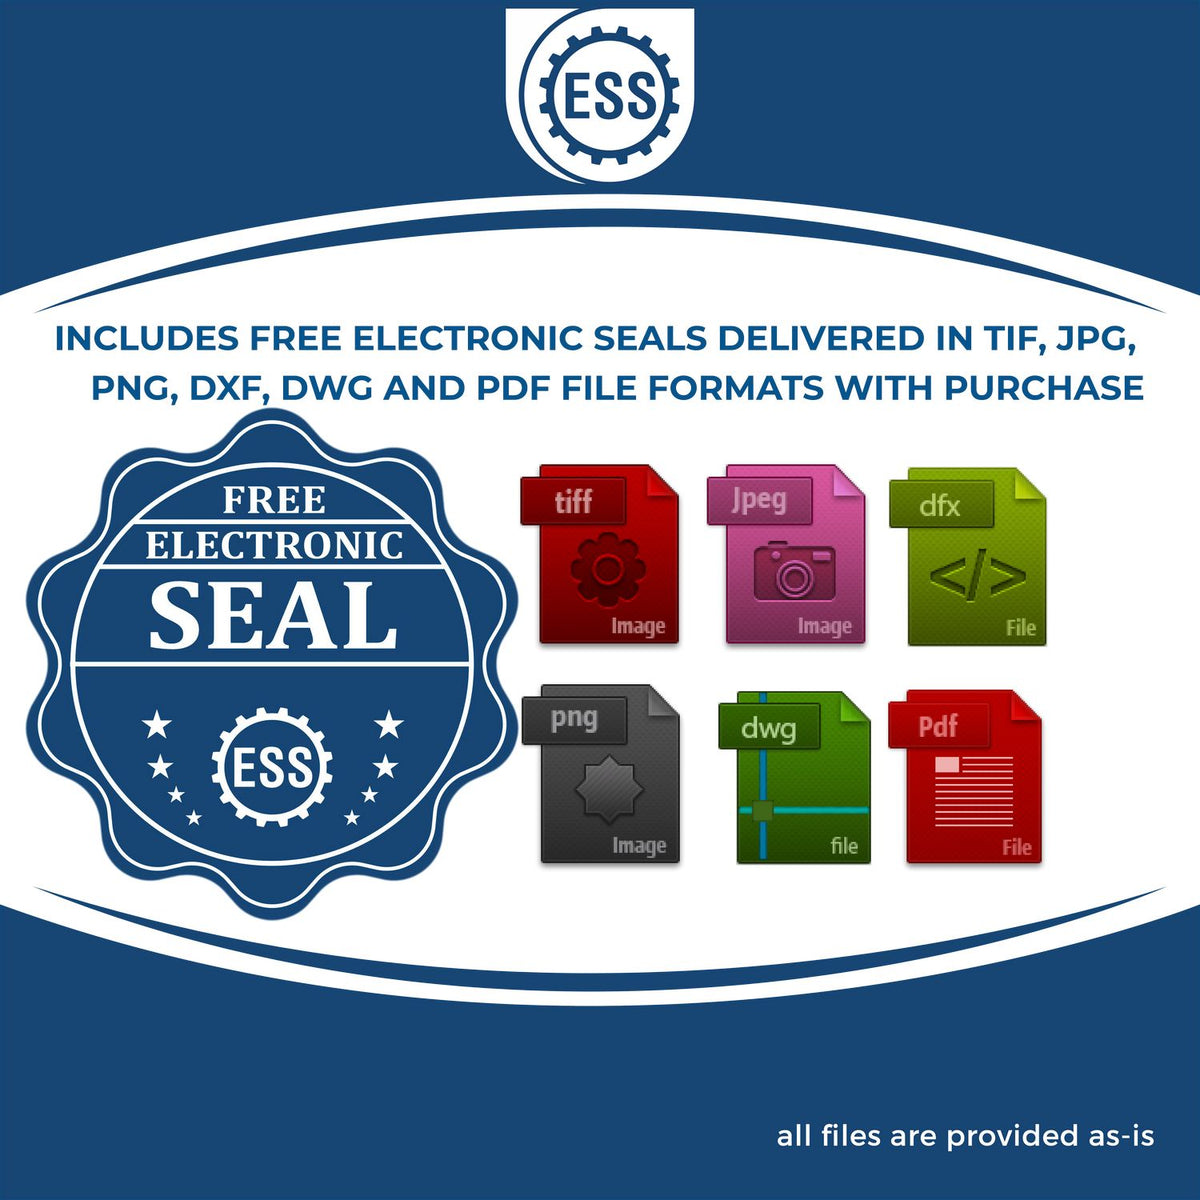 An infographic for the free electronic seal for the Heavy Duty Cast Iron Illinois Engineer Seal Embosser illustrating the different file type icons such as DXF, DWG, TIF, JPG and PNG.